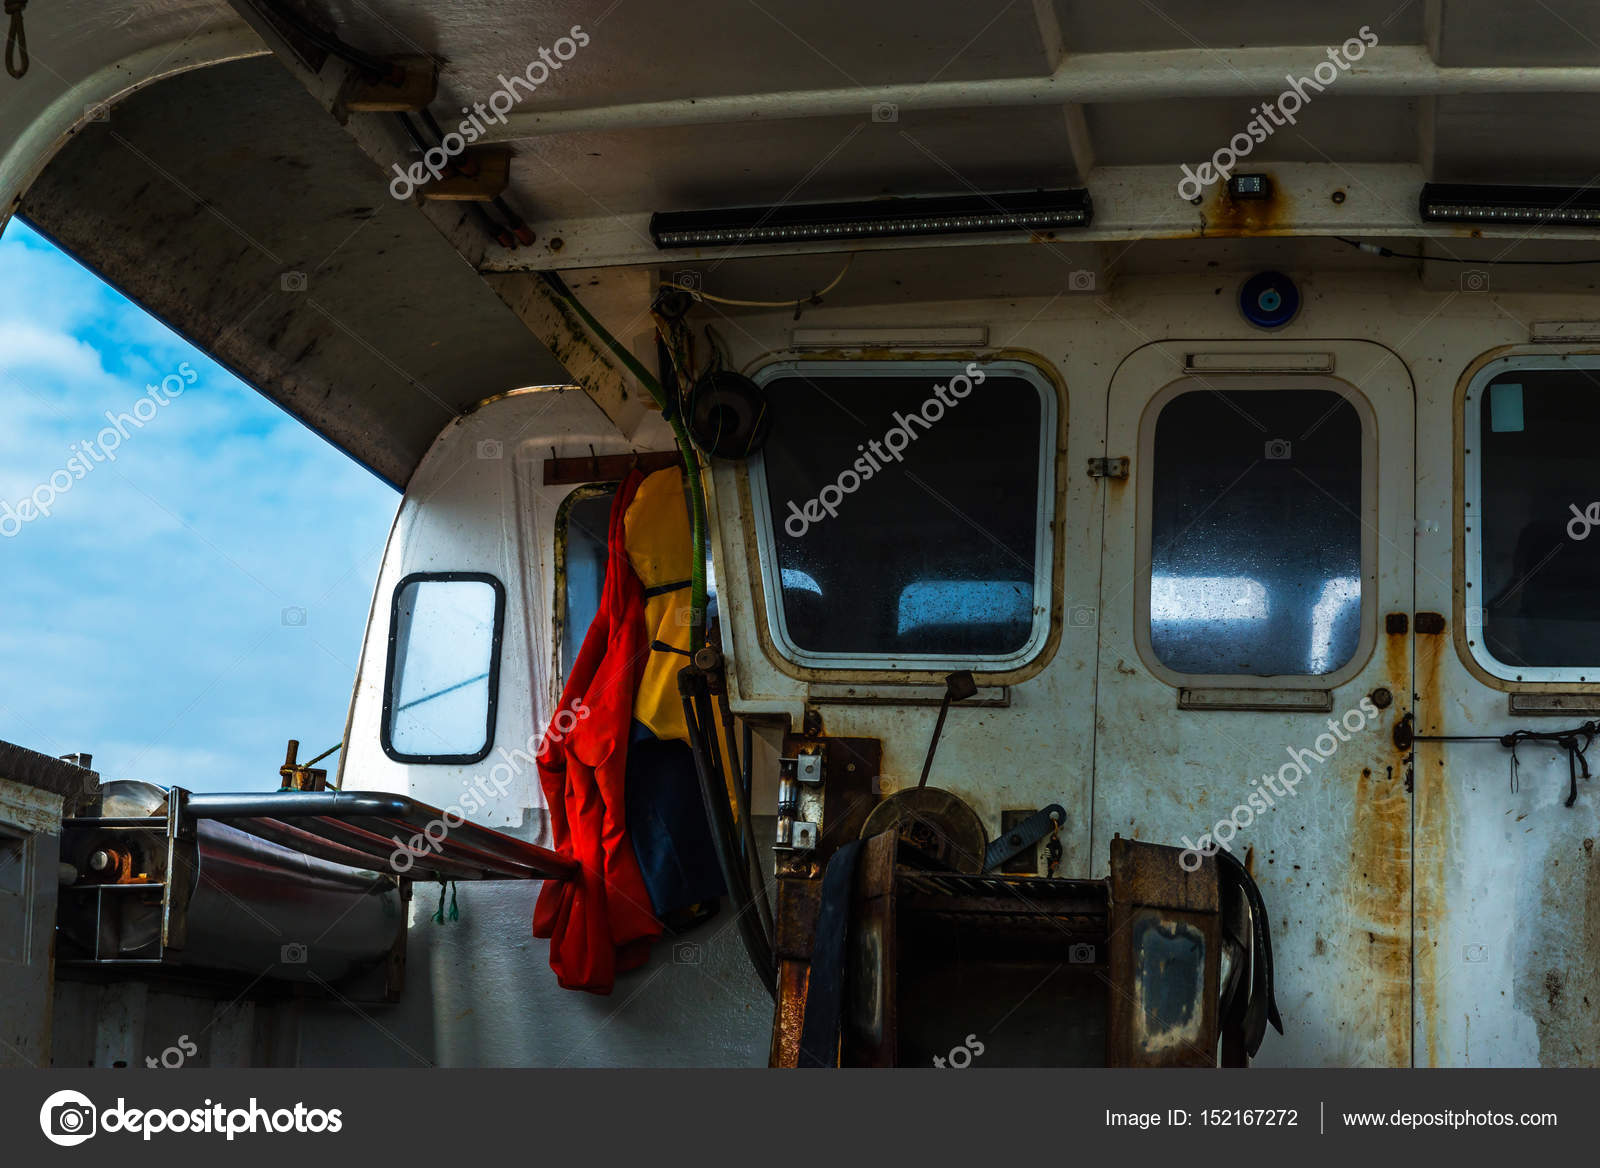 The Fishing Boat S Interior The Right Side Of The Boat The